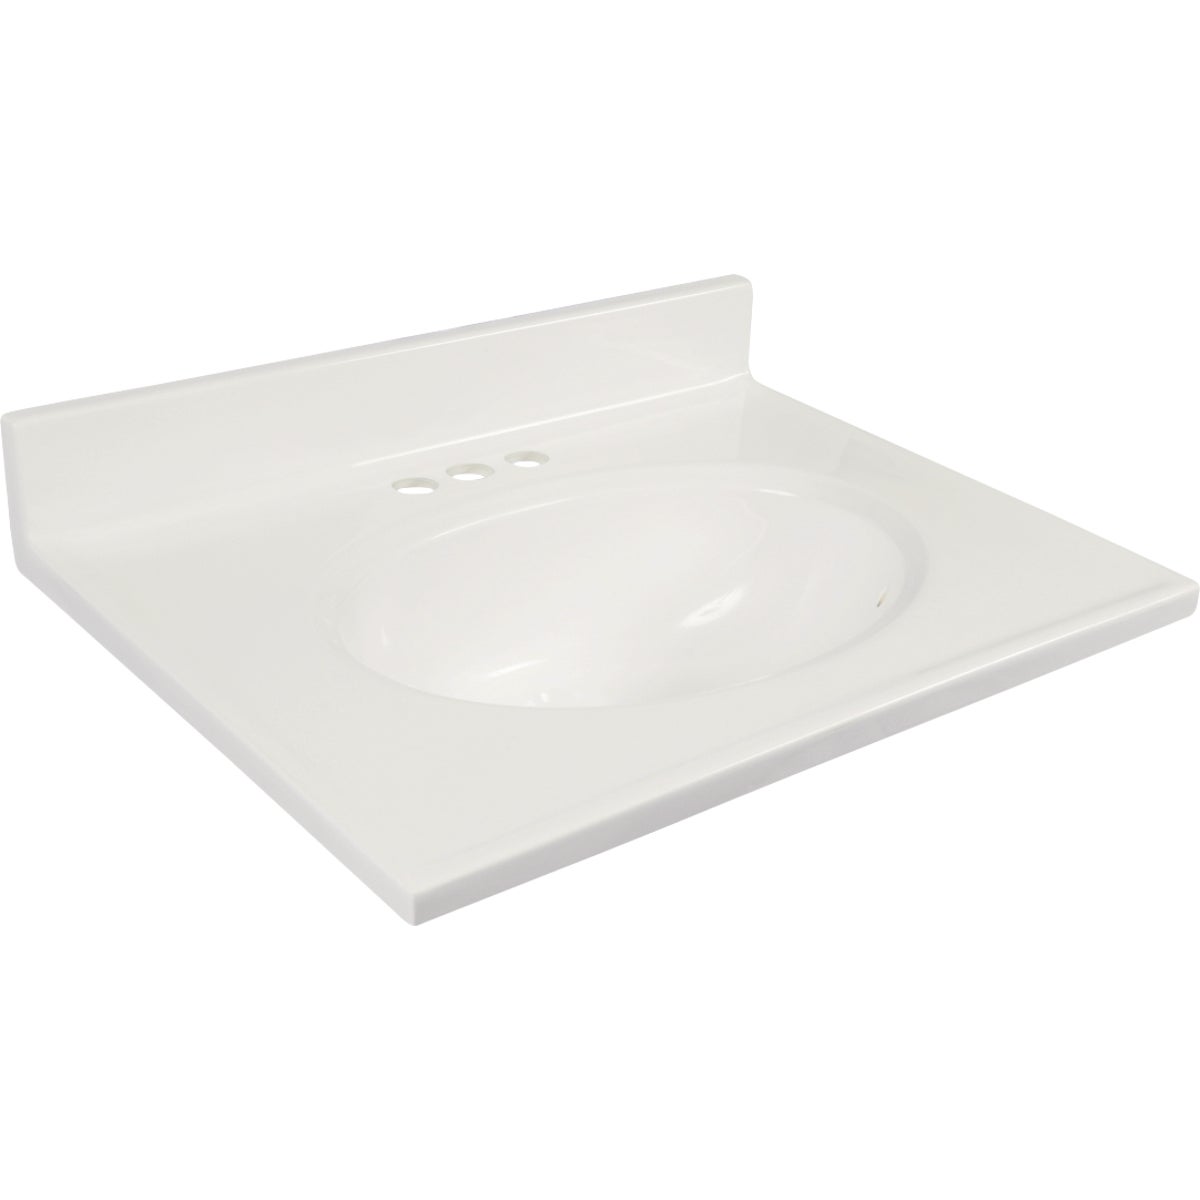 Modular Vanity Tops 31 In. W x 19 In. D Solid White Cultured Marble Non-Drip Edge Vanity Top with Oval Bowl